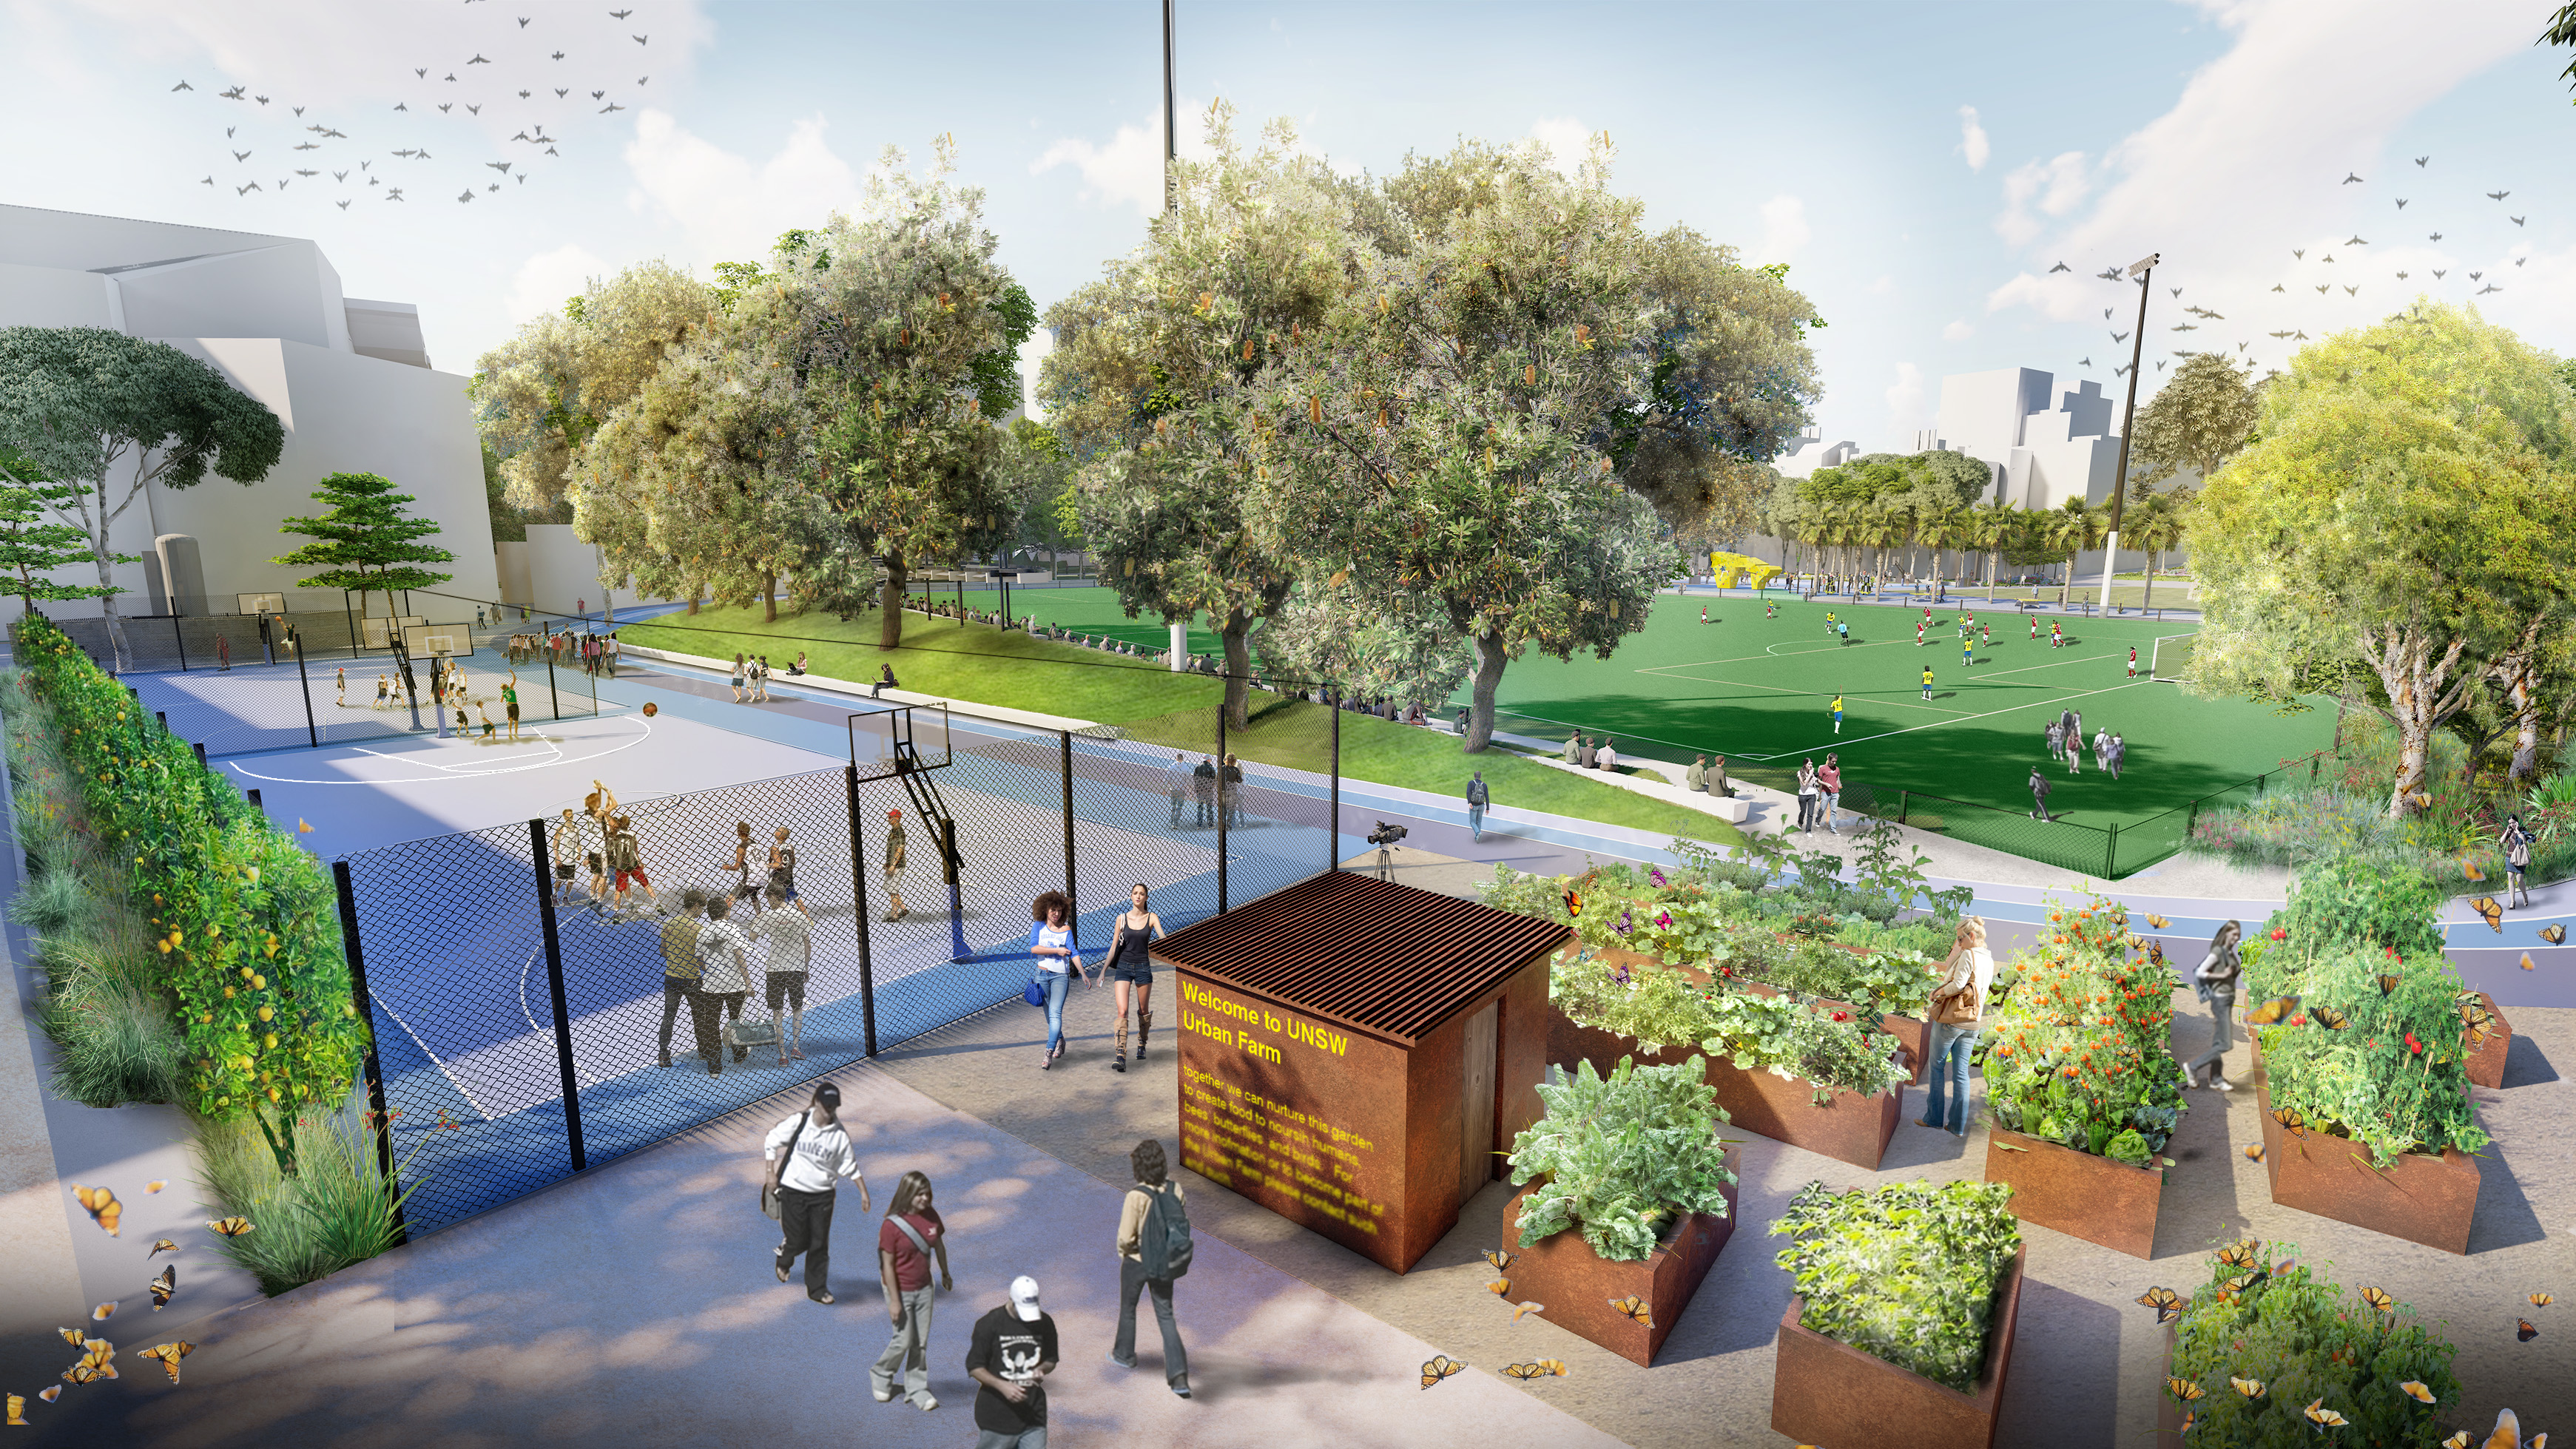 An artist mock up of the urban farm next to the multi-purpose courts